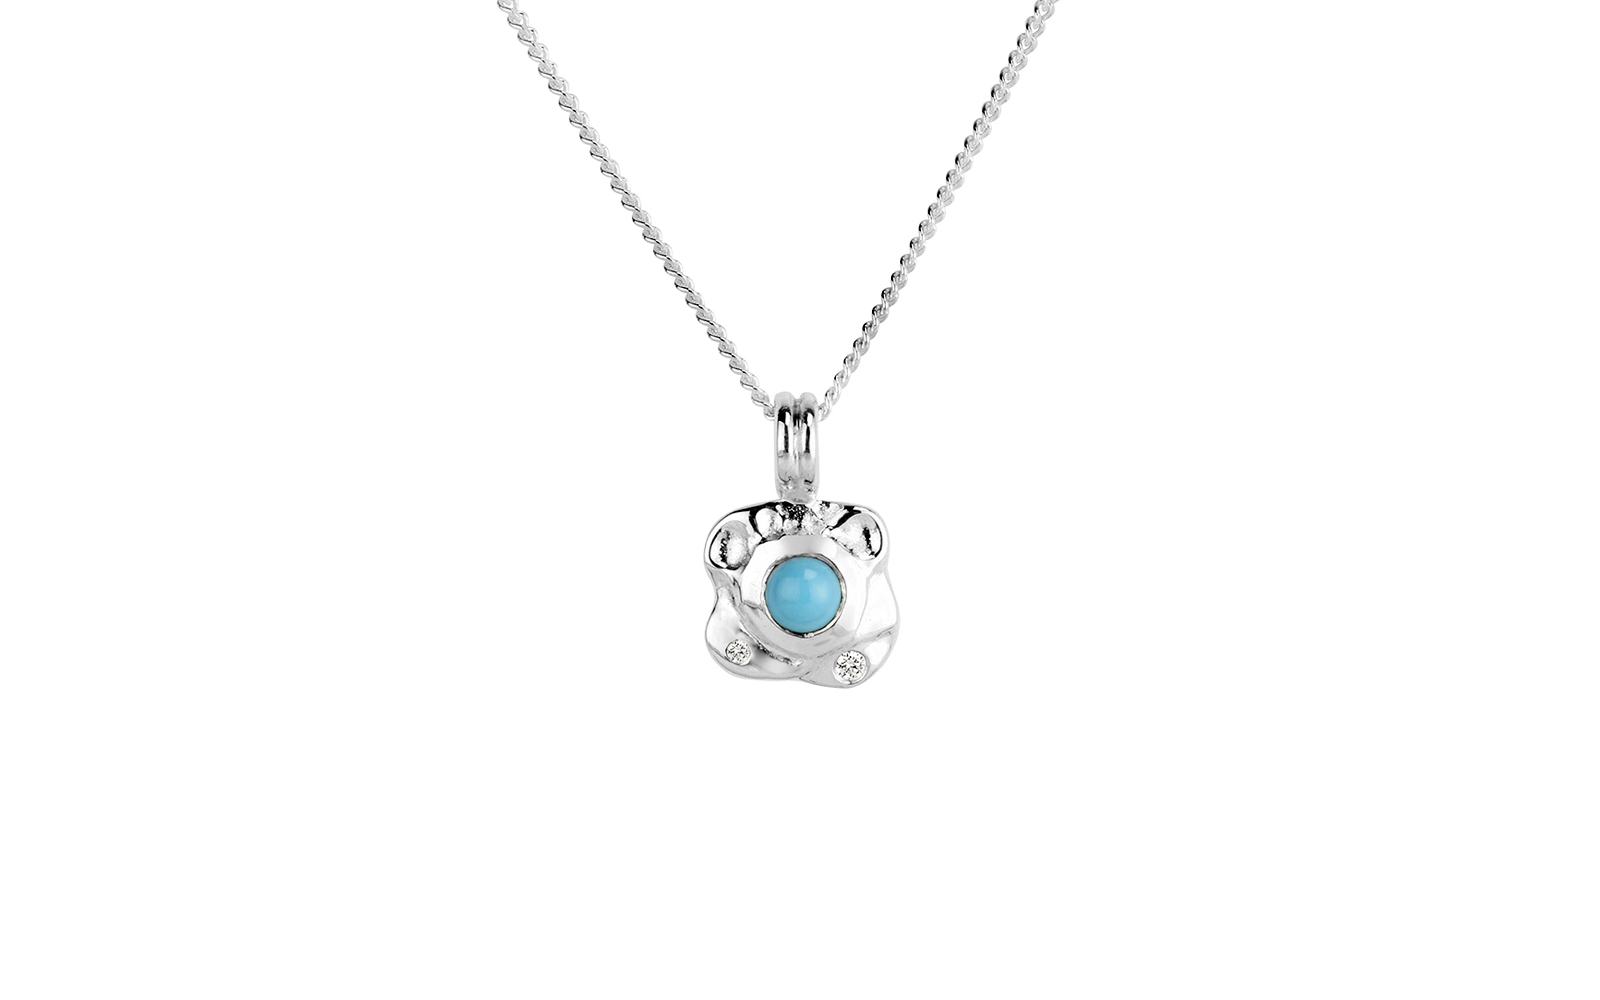 Wategos Pendant with Sleeping Beauty Turquoise Sterling Silver